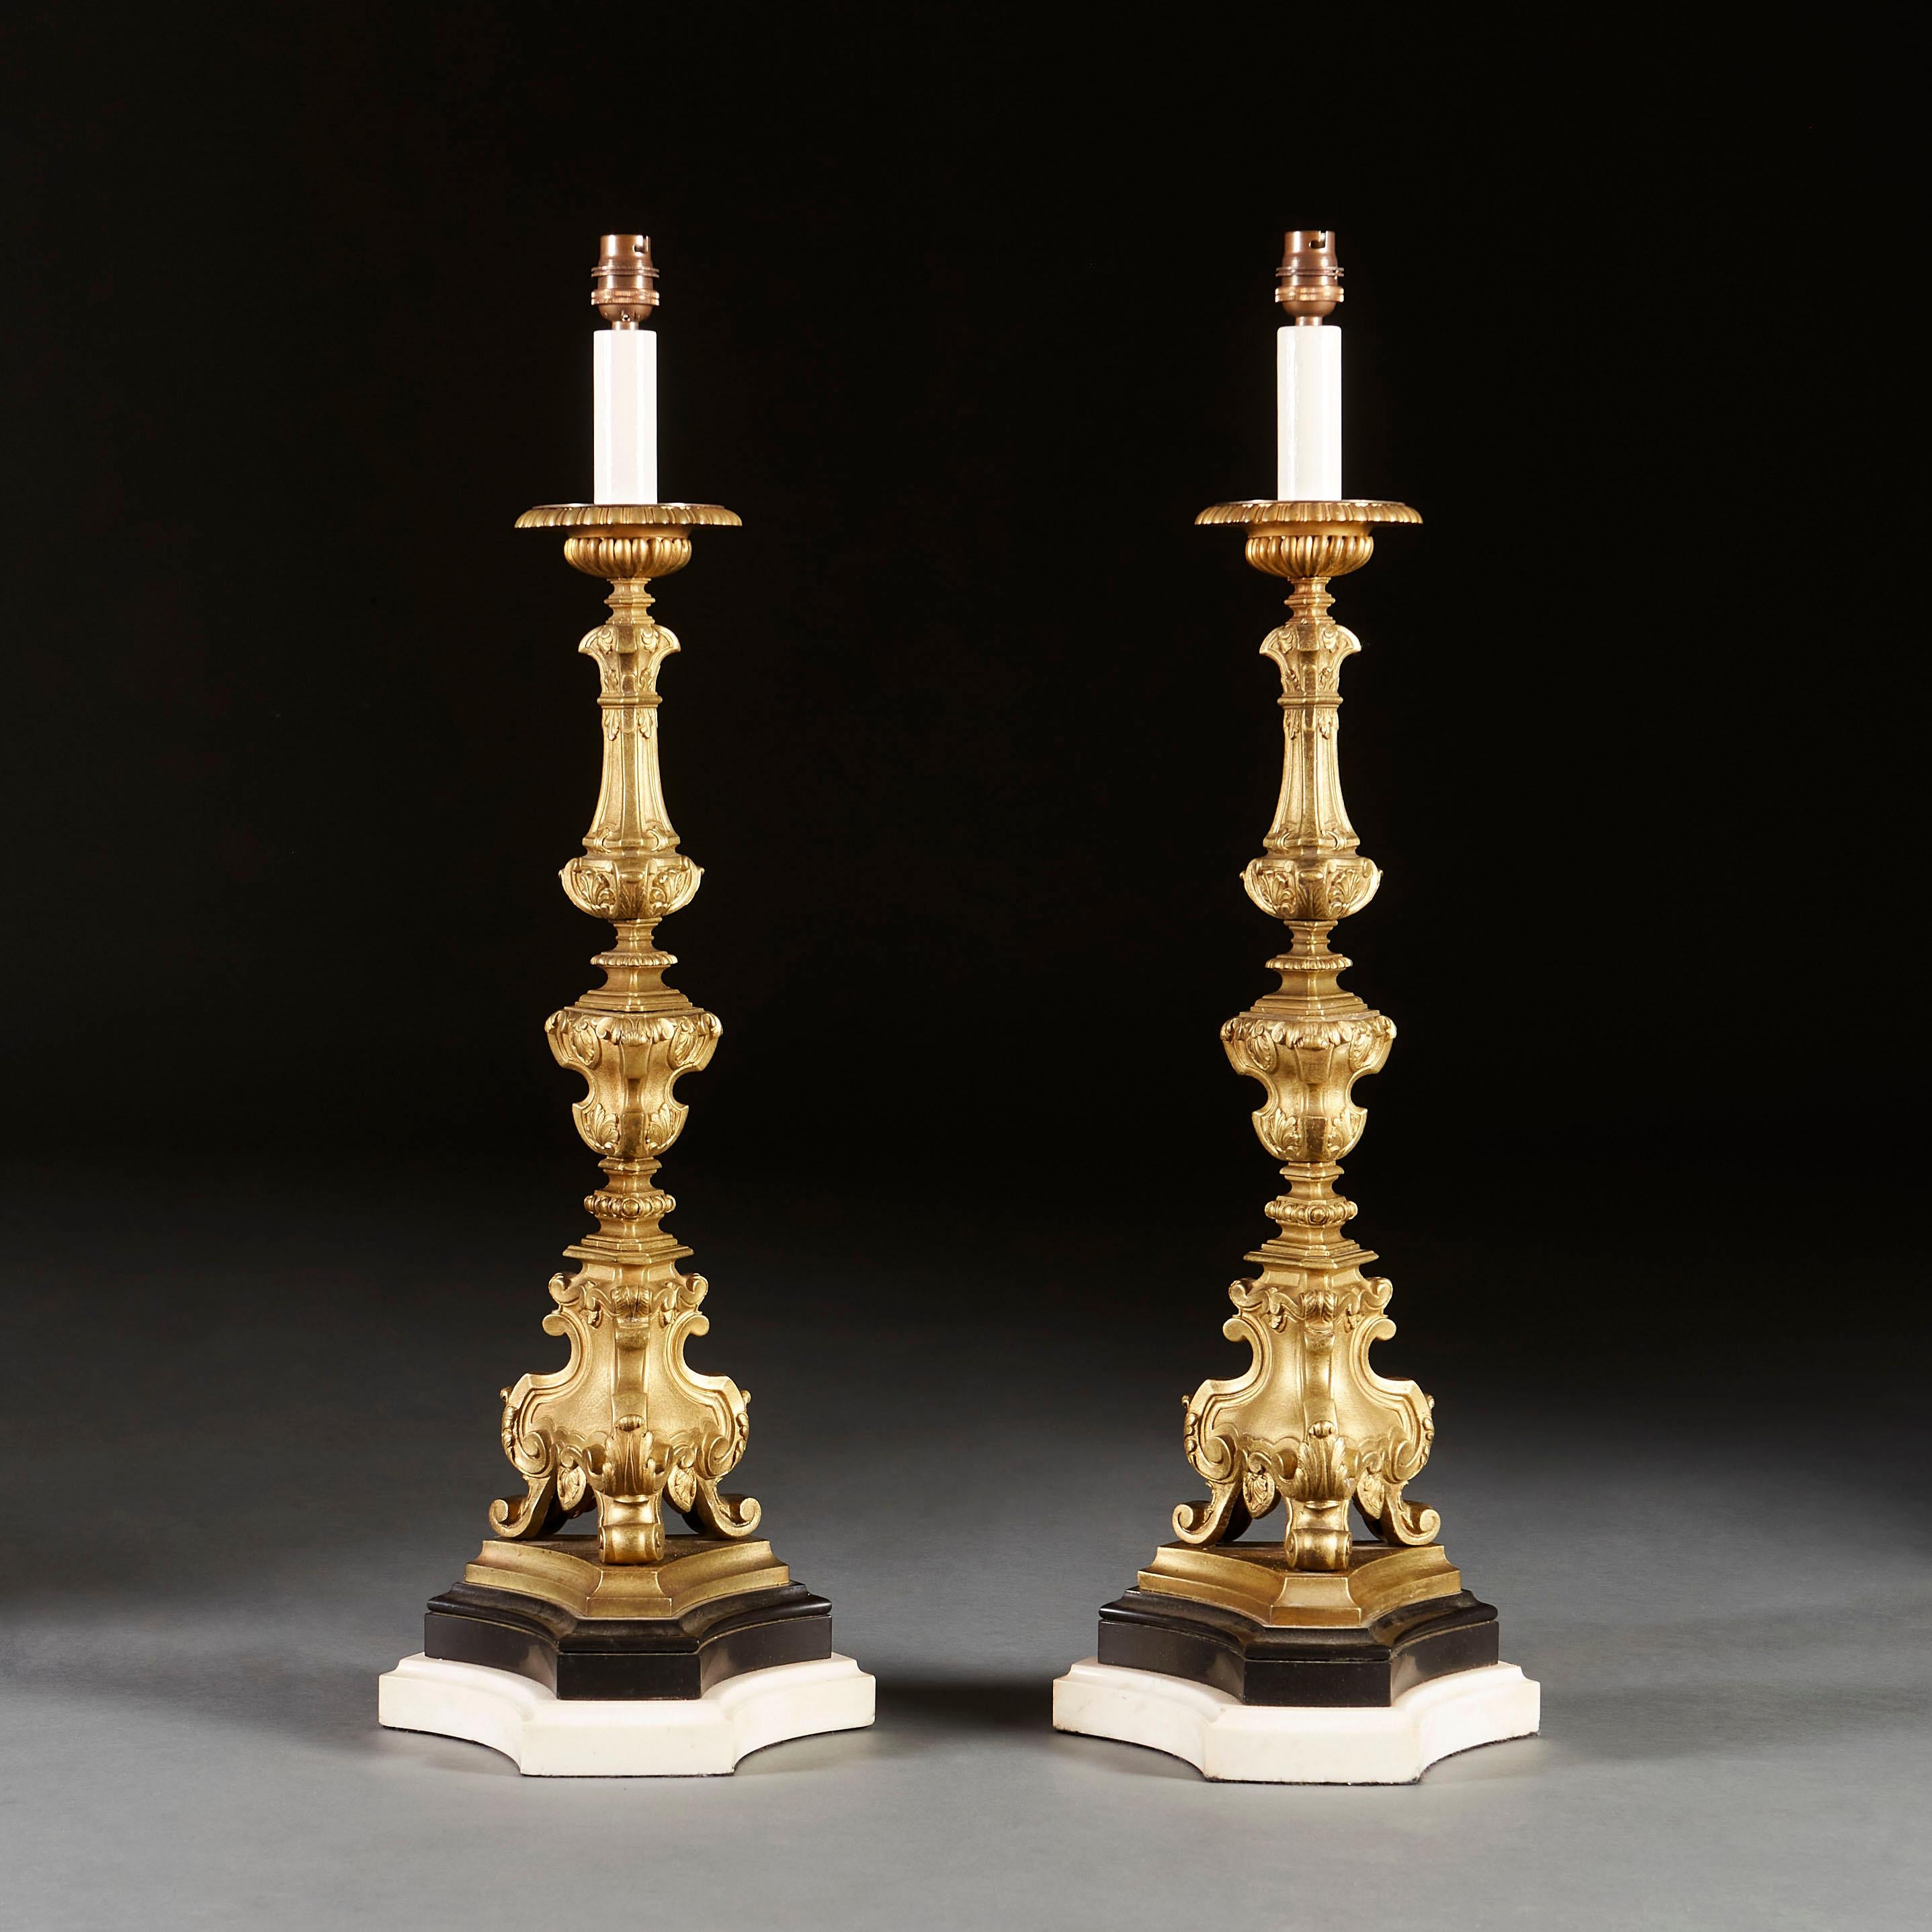 A Fine pair of early 19th century candlestick lamps, supported on marble plinths.